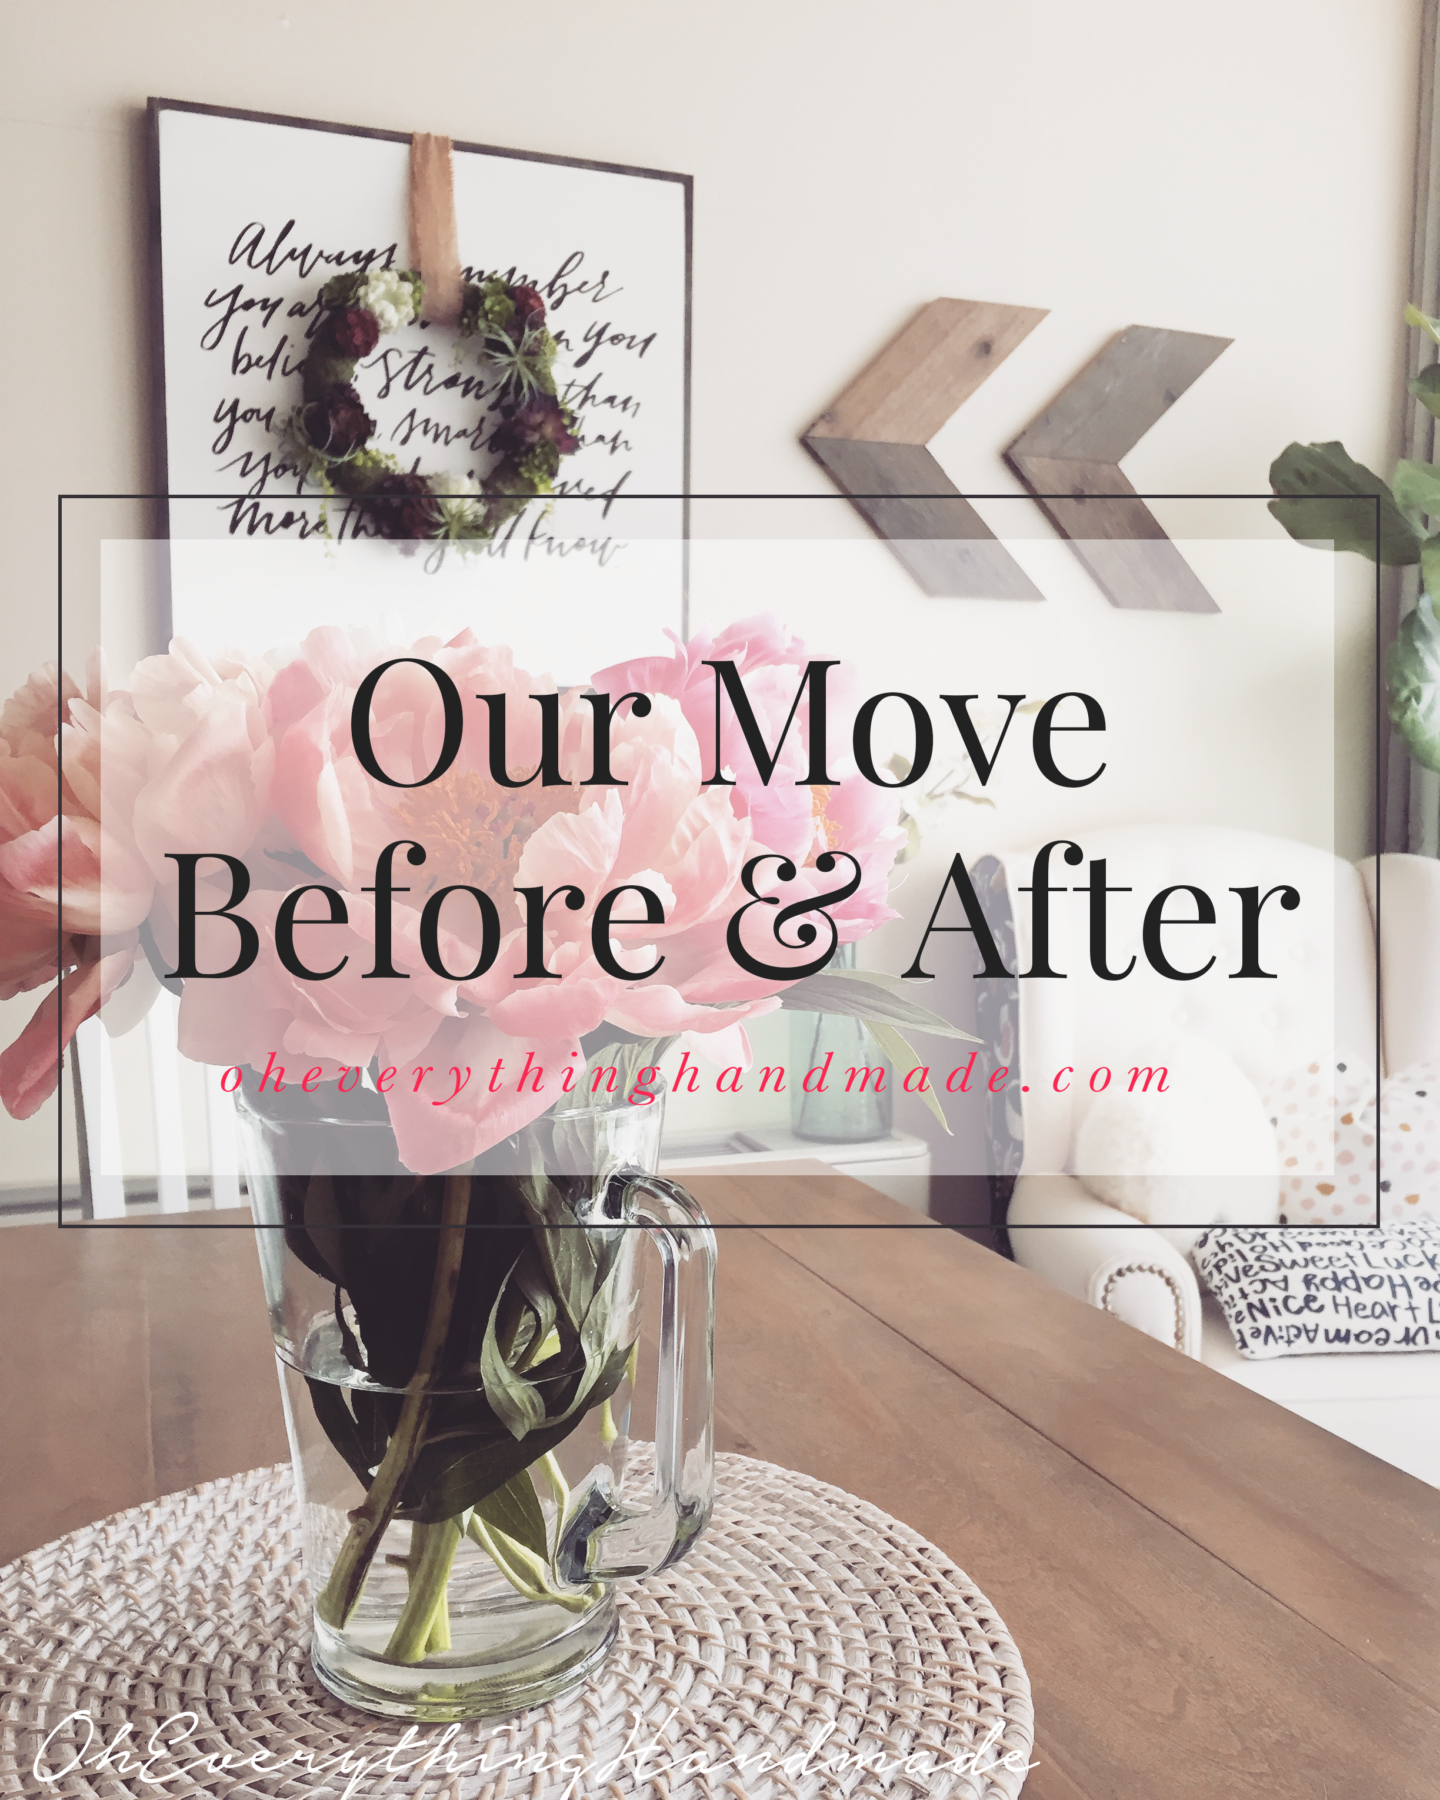 Our Move Before & After